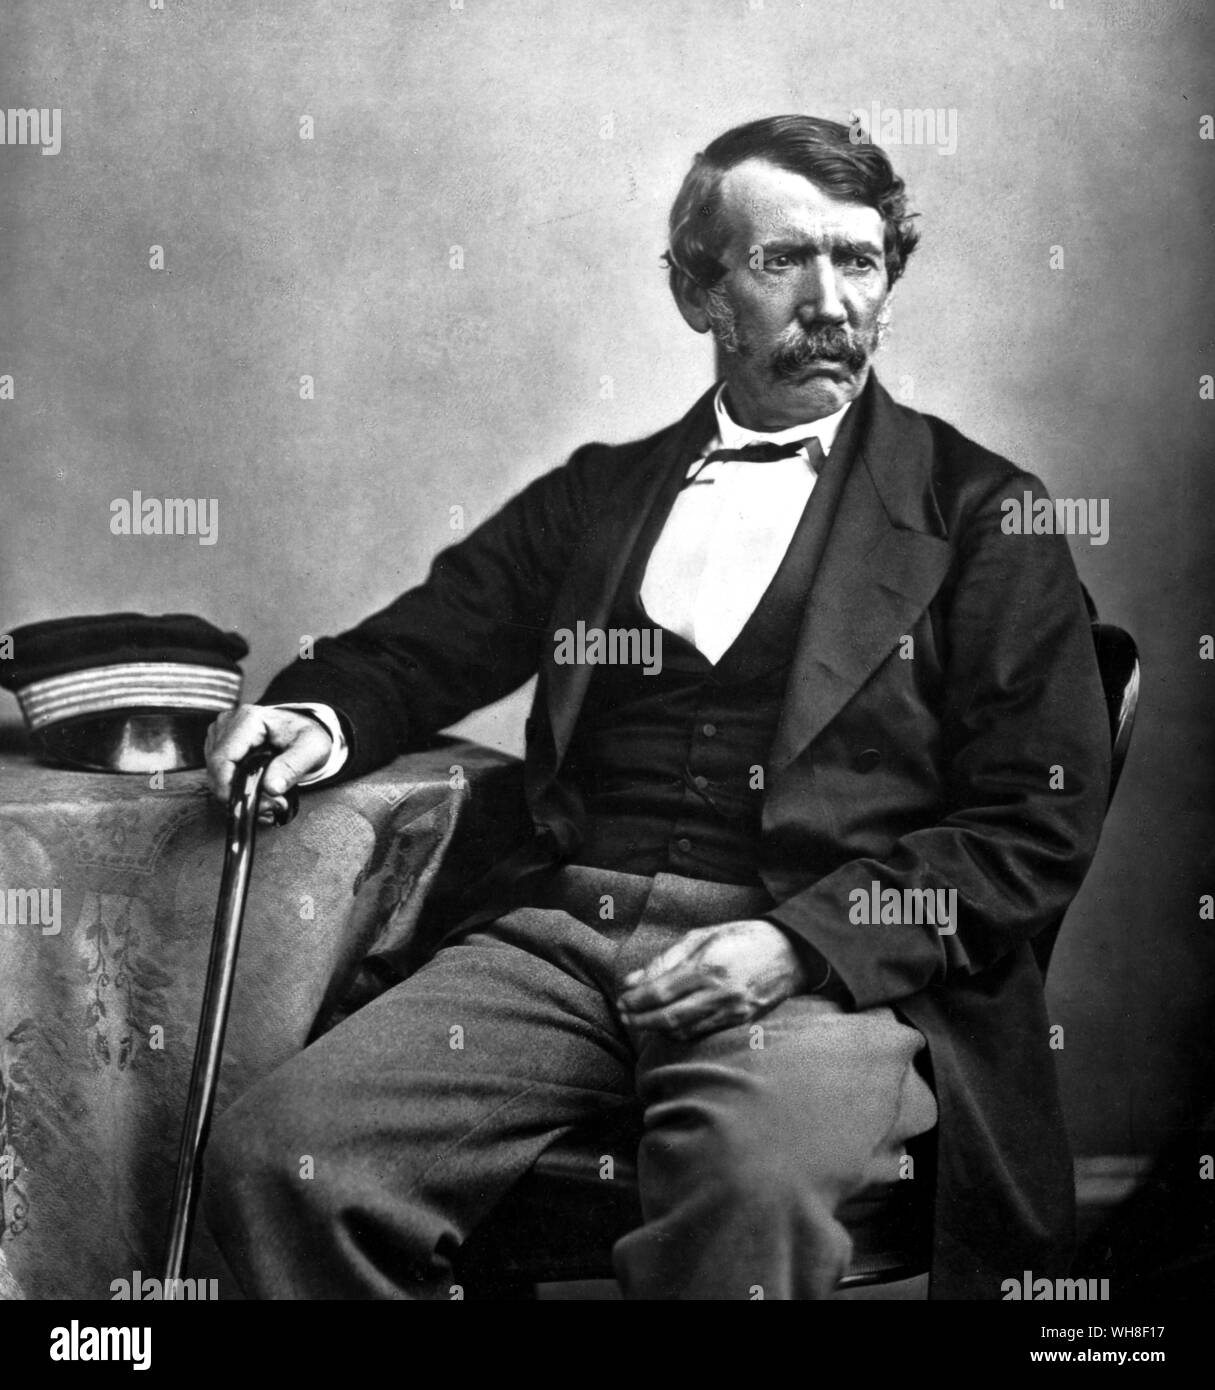 David Livingstone (1813-1873), at Hamilton Lanarkshire Scotland 1864. Scottish missionary and explorer. He travelled extensively in Africa and discovered the Victoria Falls and the Zambezi River. . . . . . Stock Photo